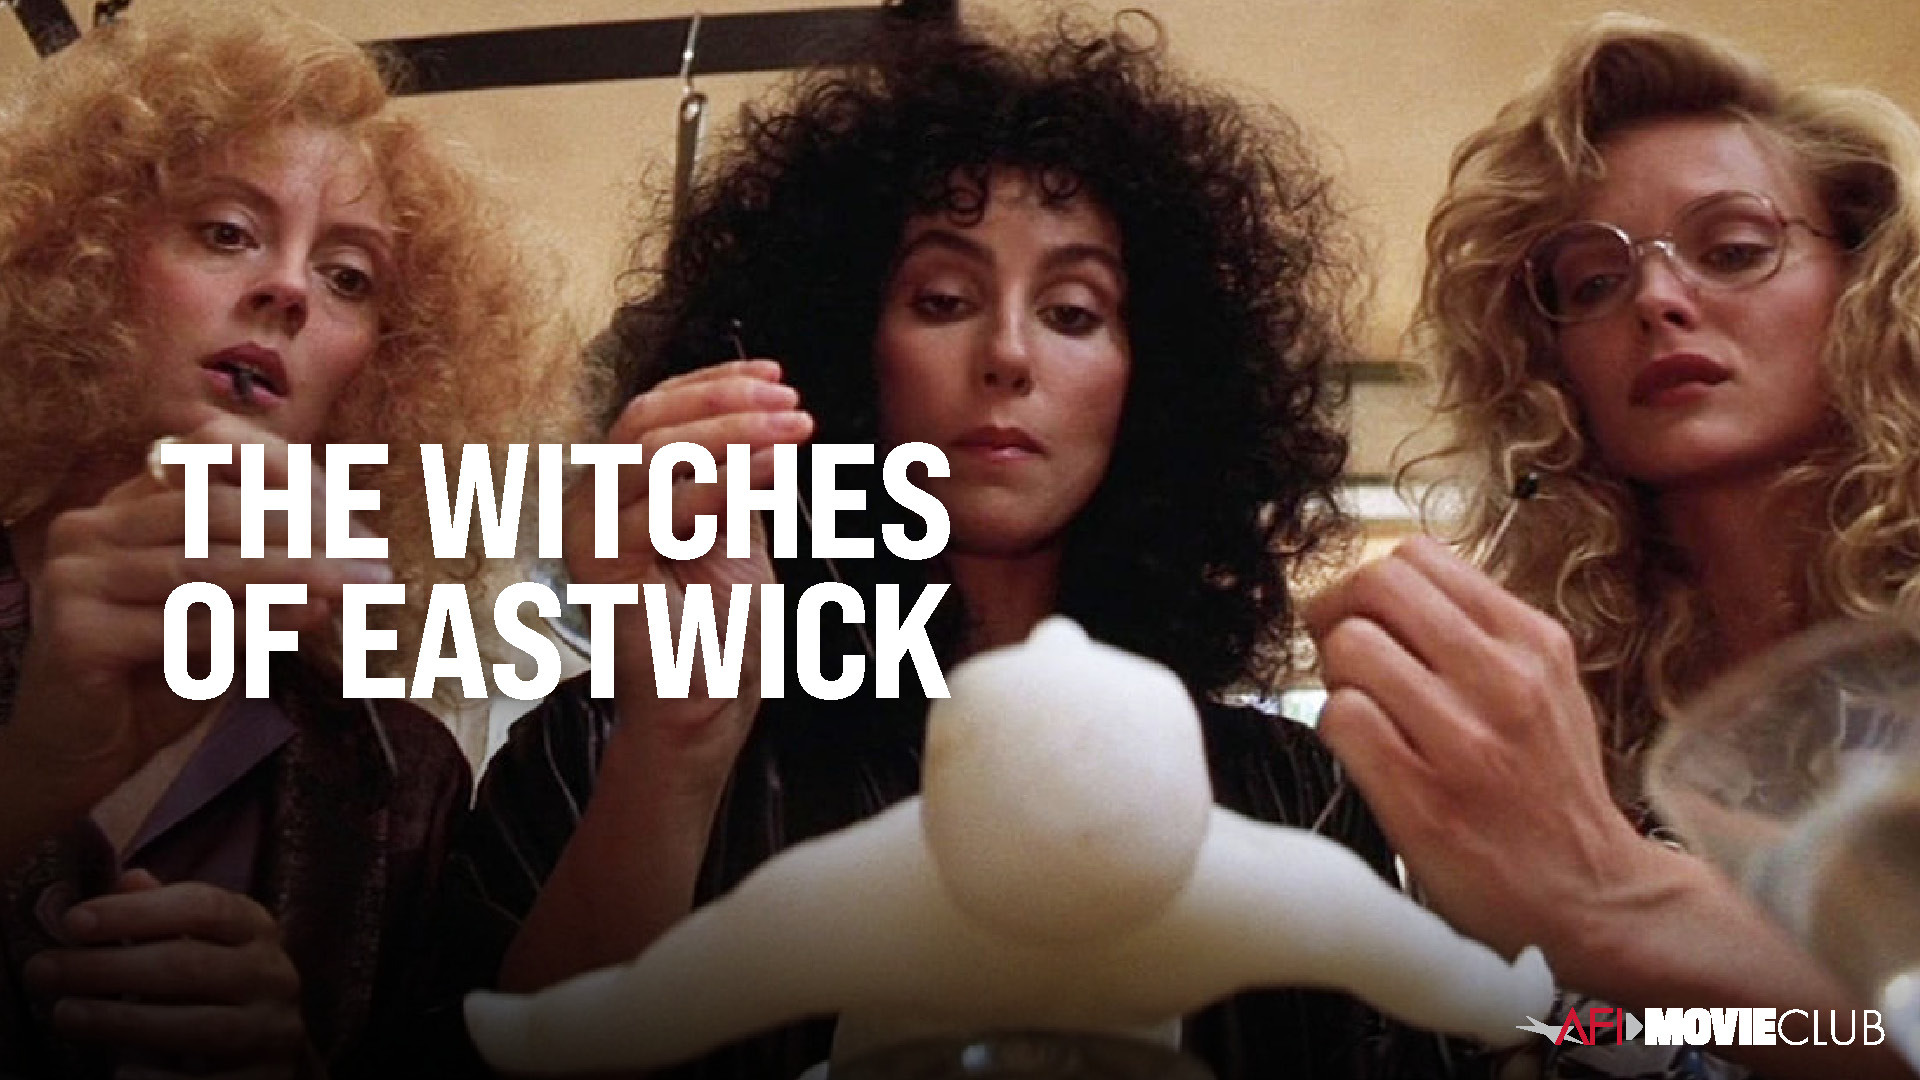 The Witches of Eastwick Film Still - Michelle Pfeiffer, Susan Sarandon, and Cher